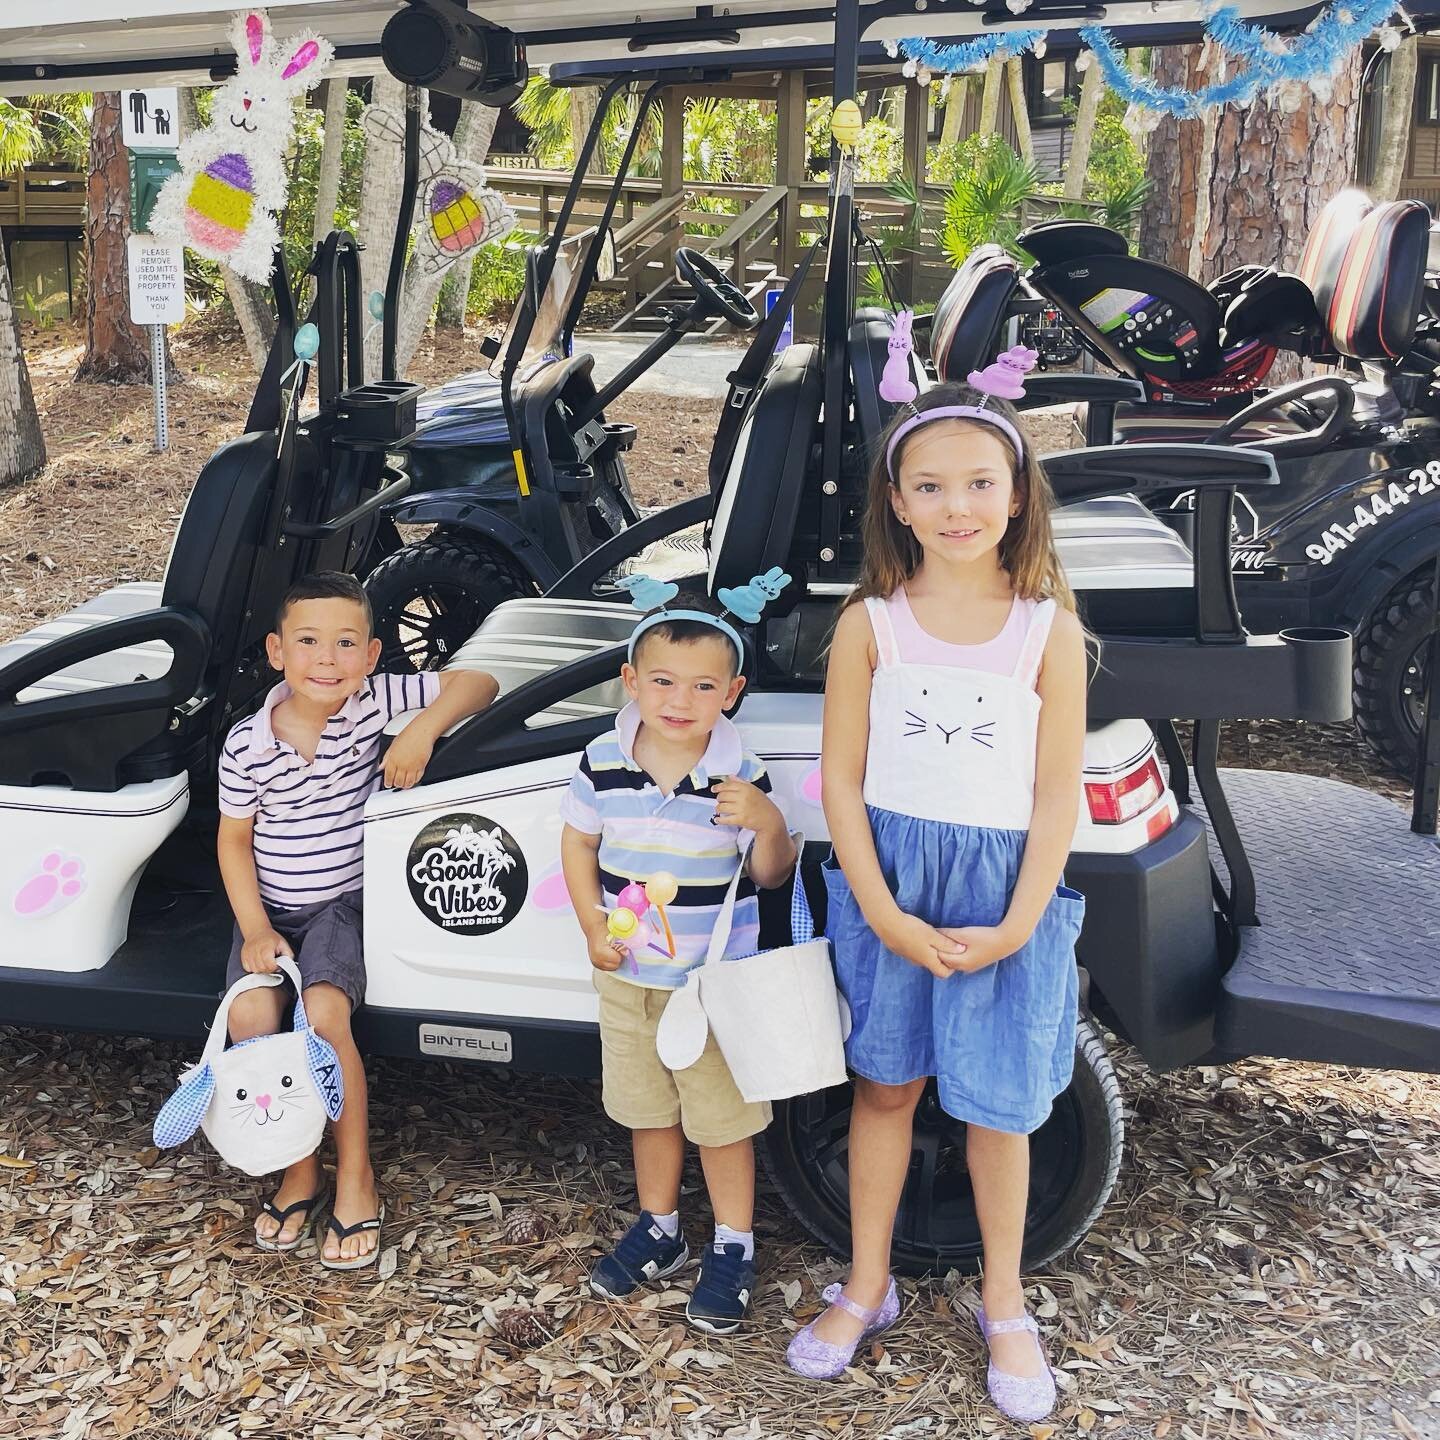 Wishing everyone good vibes only on this Easter Sunday 🐰 #siestakey #goodvibes #electricgolfcarts